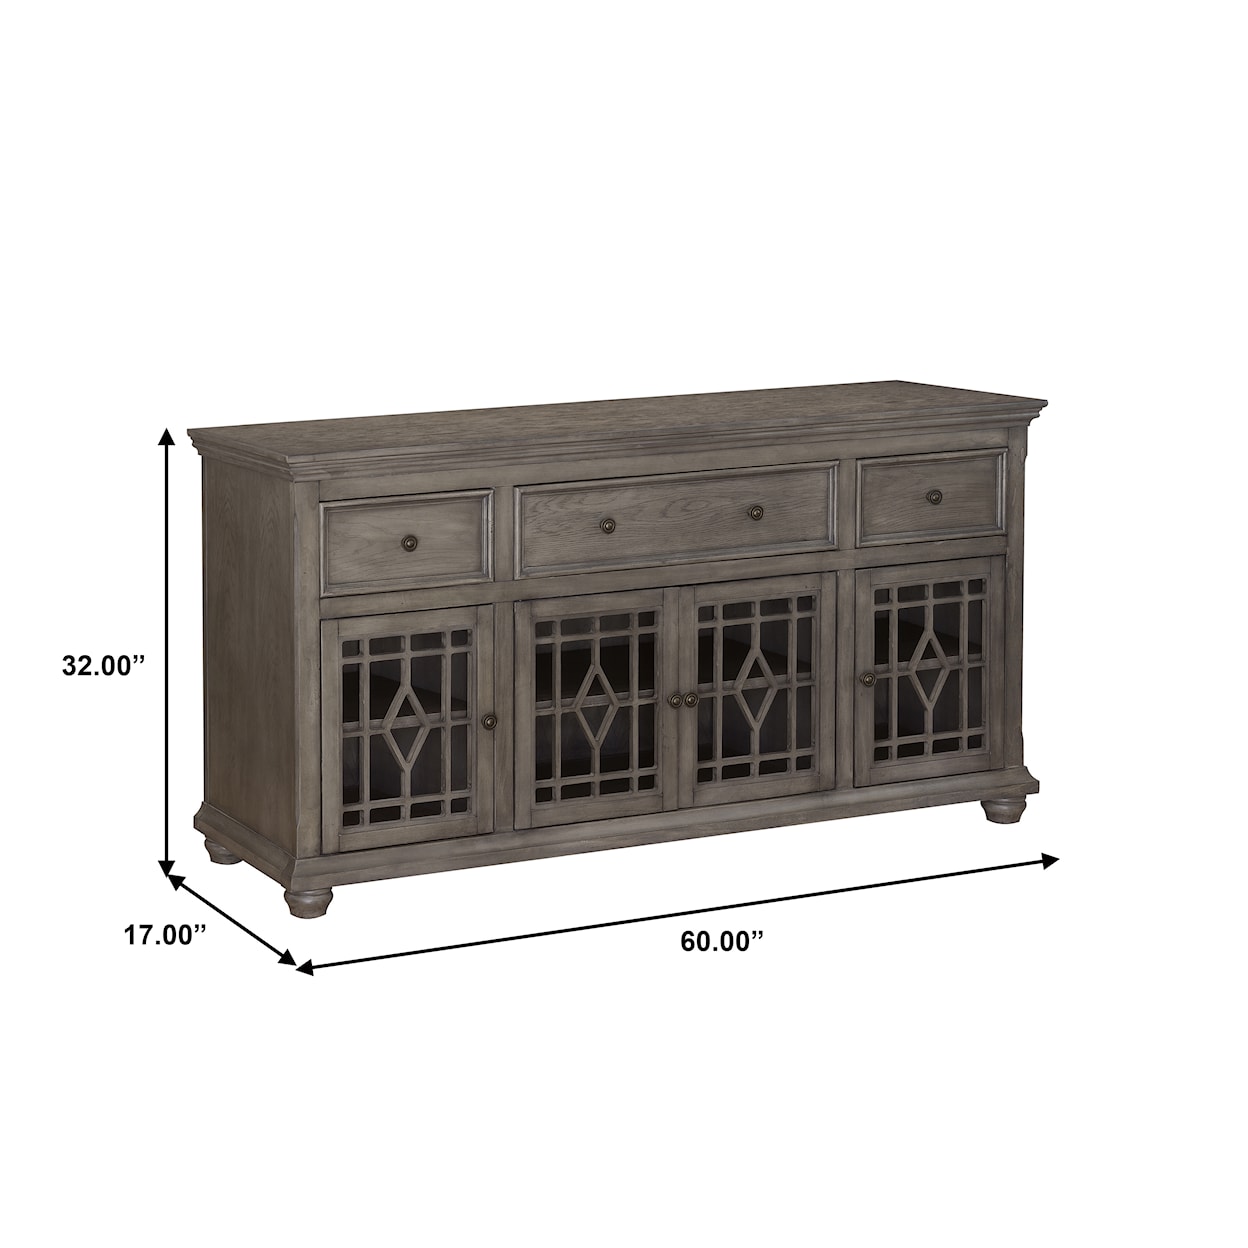 Accentrics Home Accents Four Door Cabinet in Ash Grey